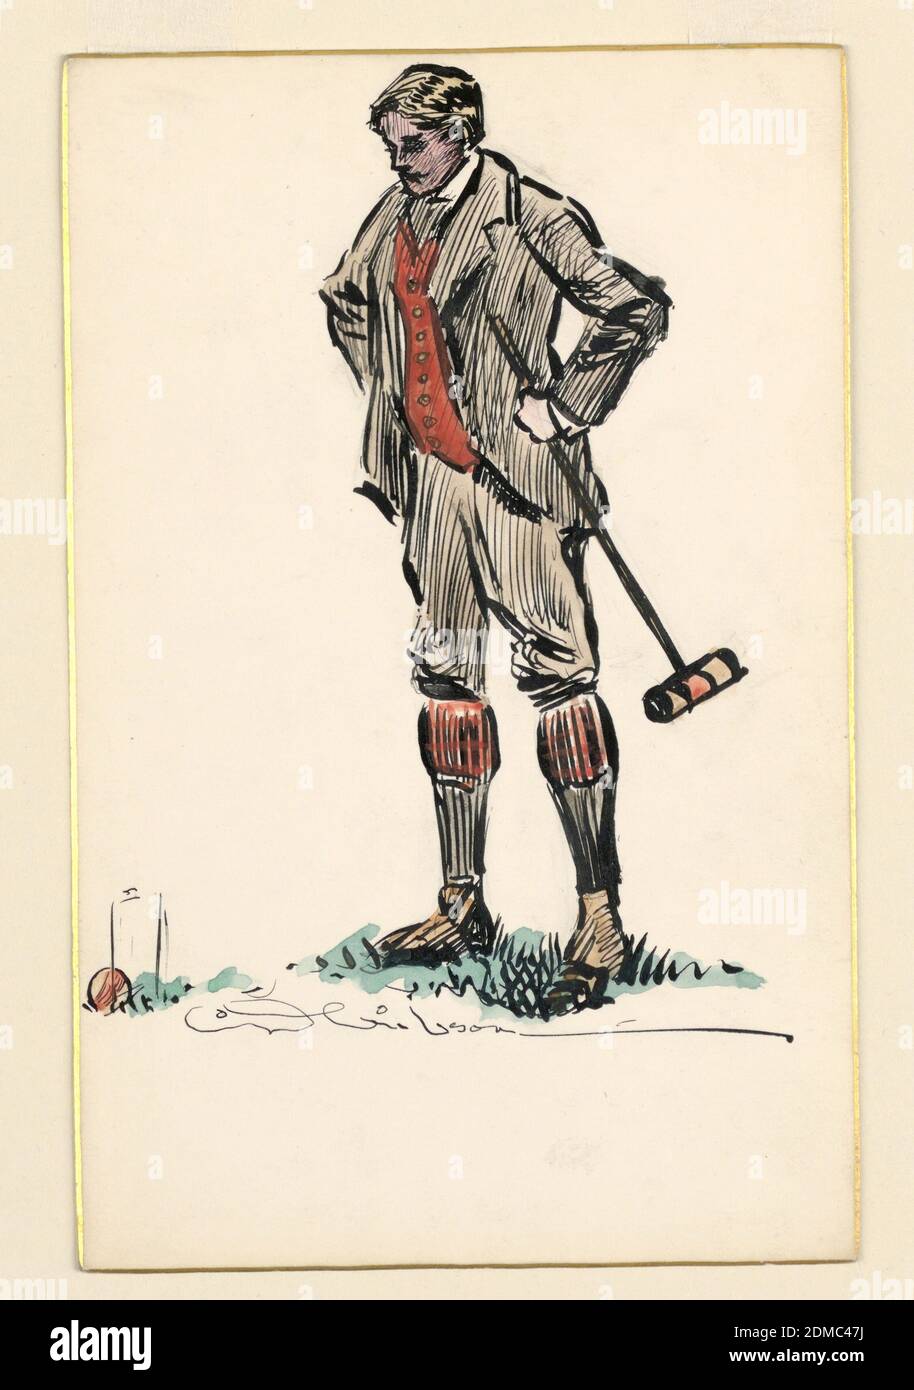 Croquet Player, Charles Dana Gibson, American, 1867–1944, Pen and black ink, with graphite and watercolor, on paperboard, Young man in knickerbockers standing, hands on hips, before a croquet wicket, and holding the mallet in his left hand., USA, ca. 1900, figures, Drawing Stock Photo